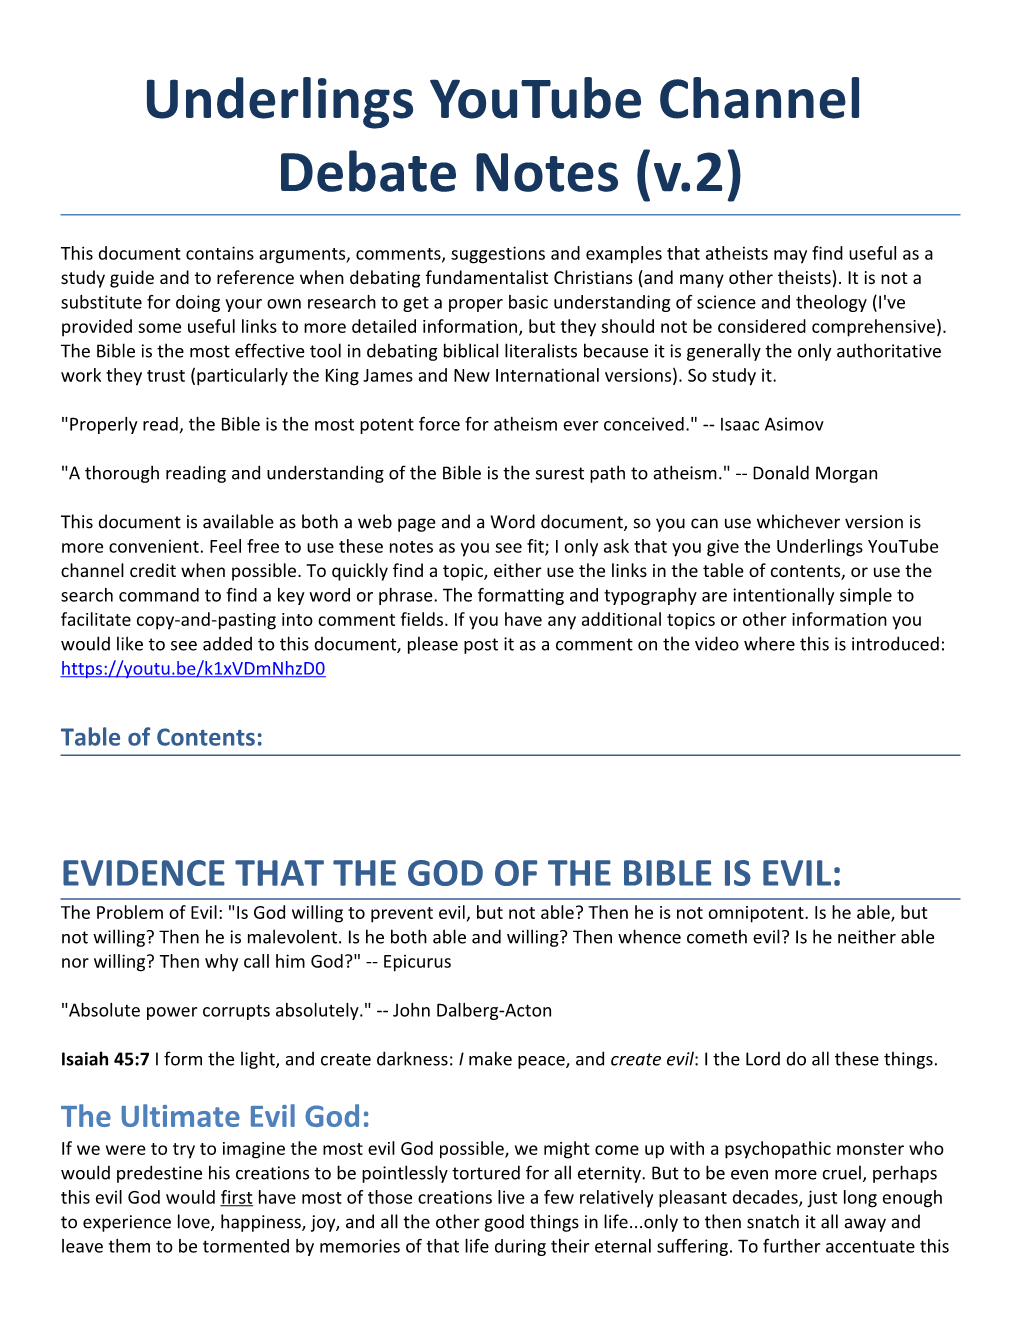 Underlings Youtube Channel Debate Notes / Page 1